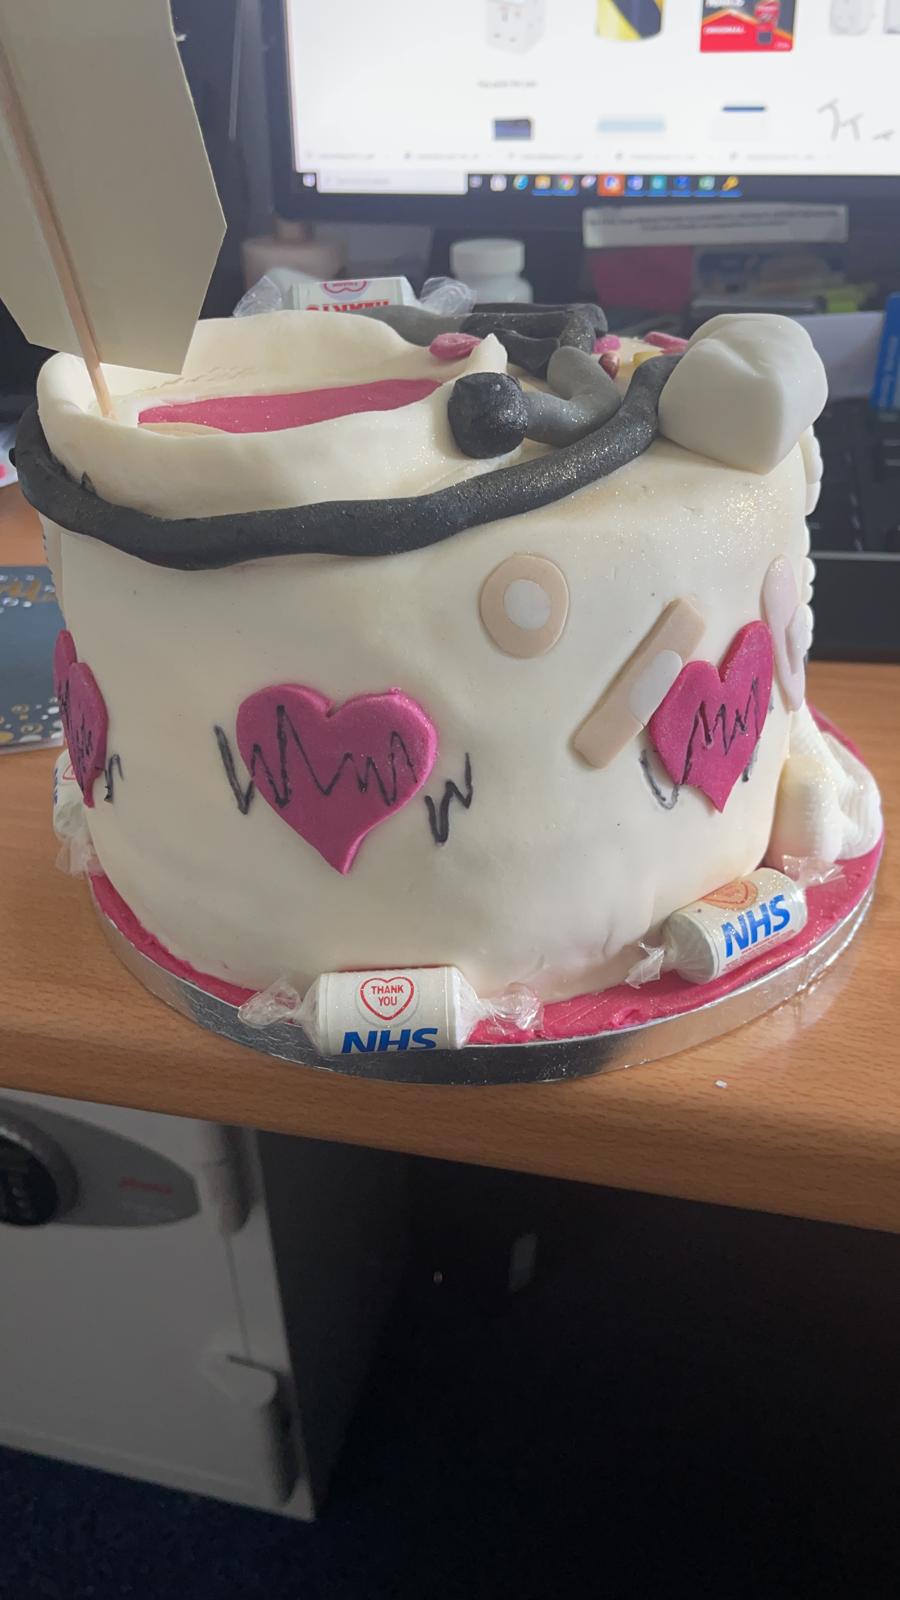 A beautiful cake handmade by one of our patients to say thank you